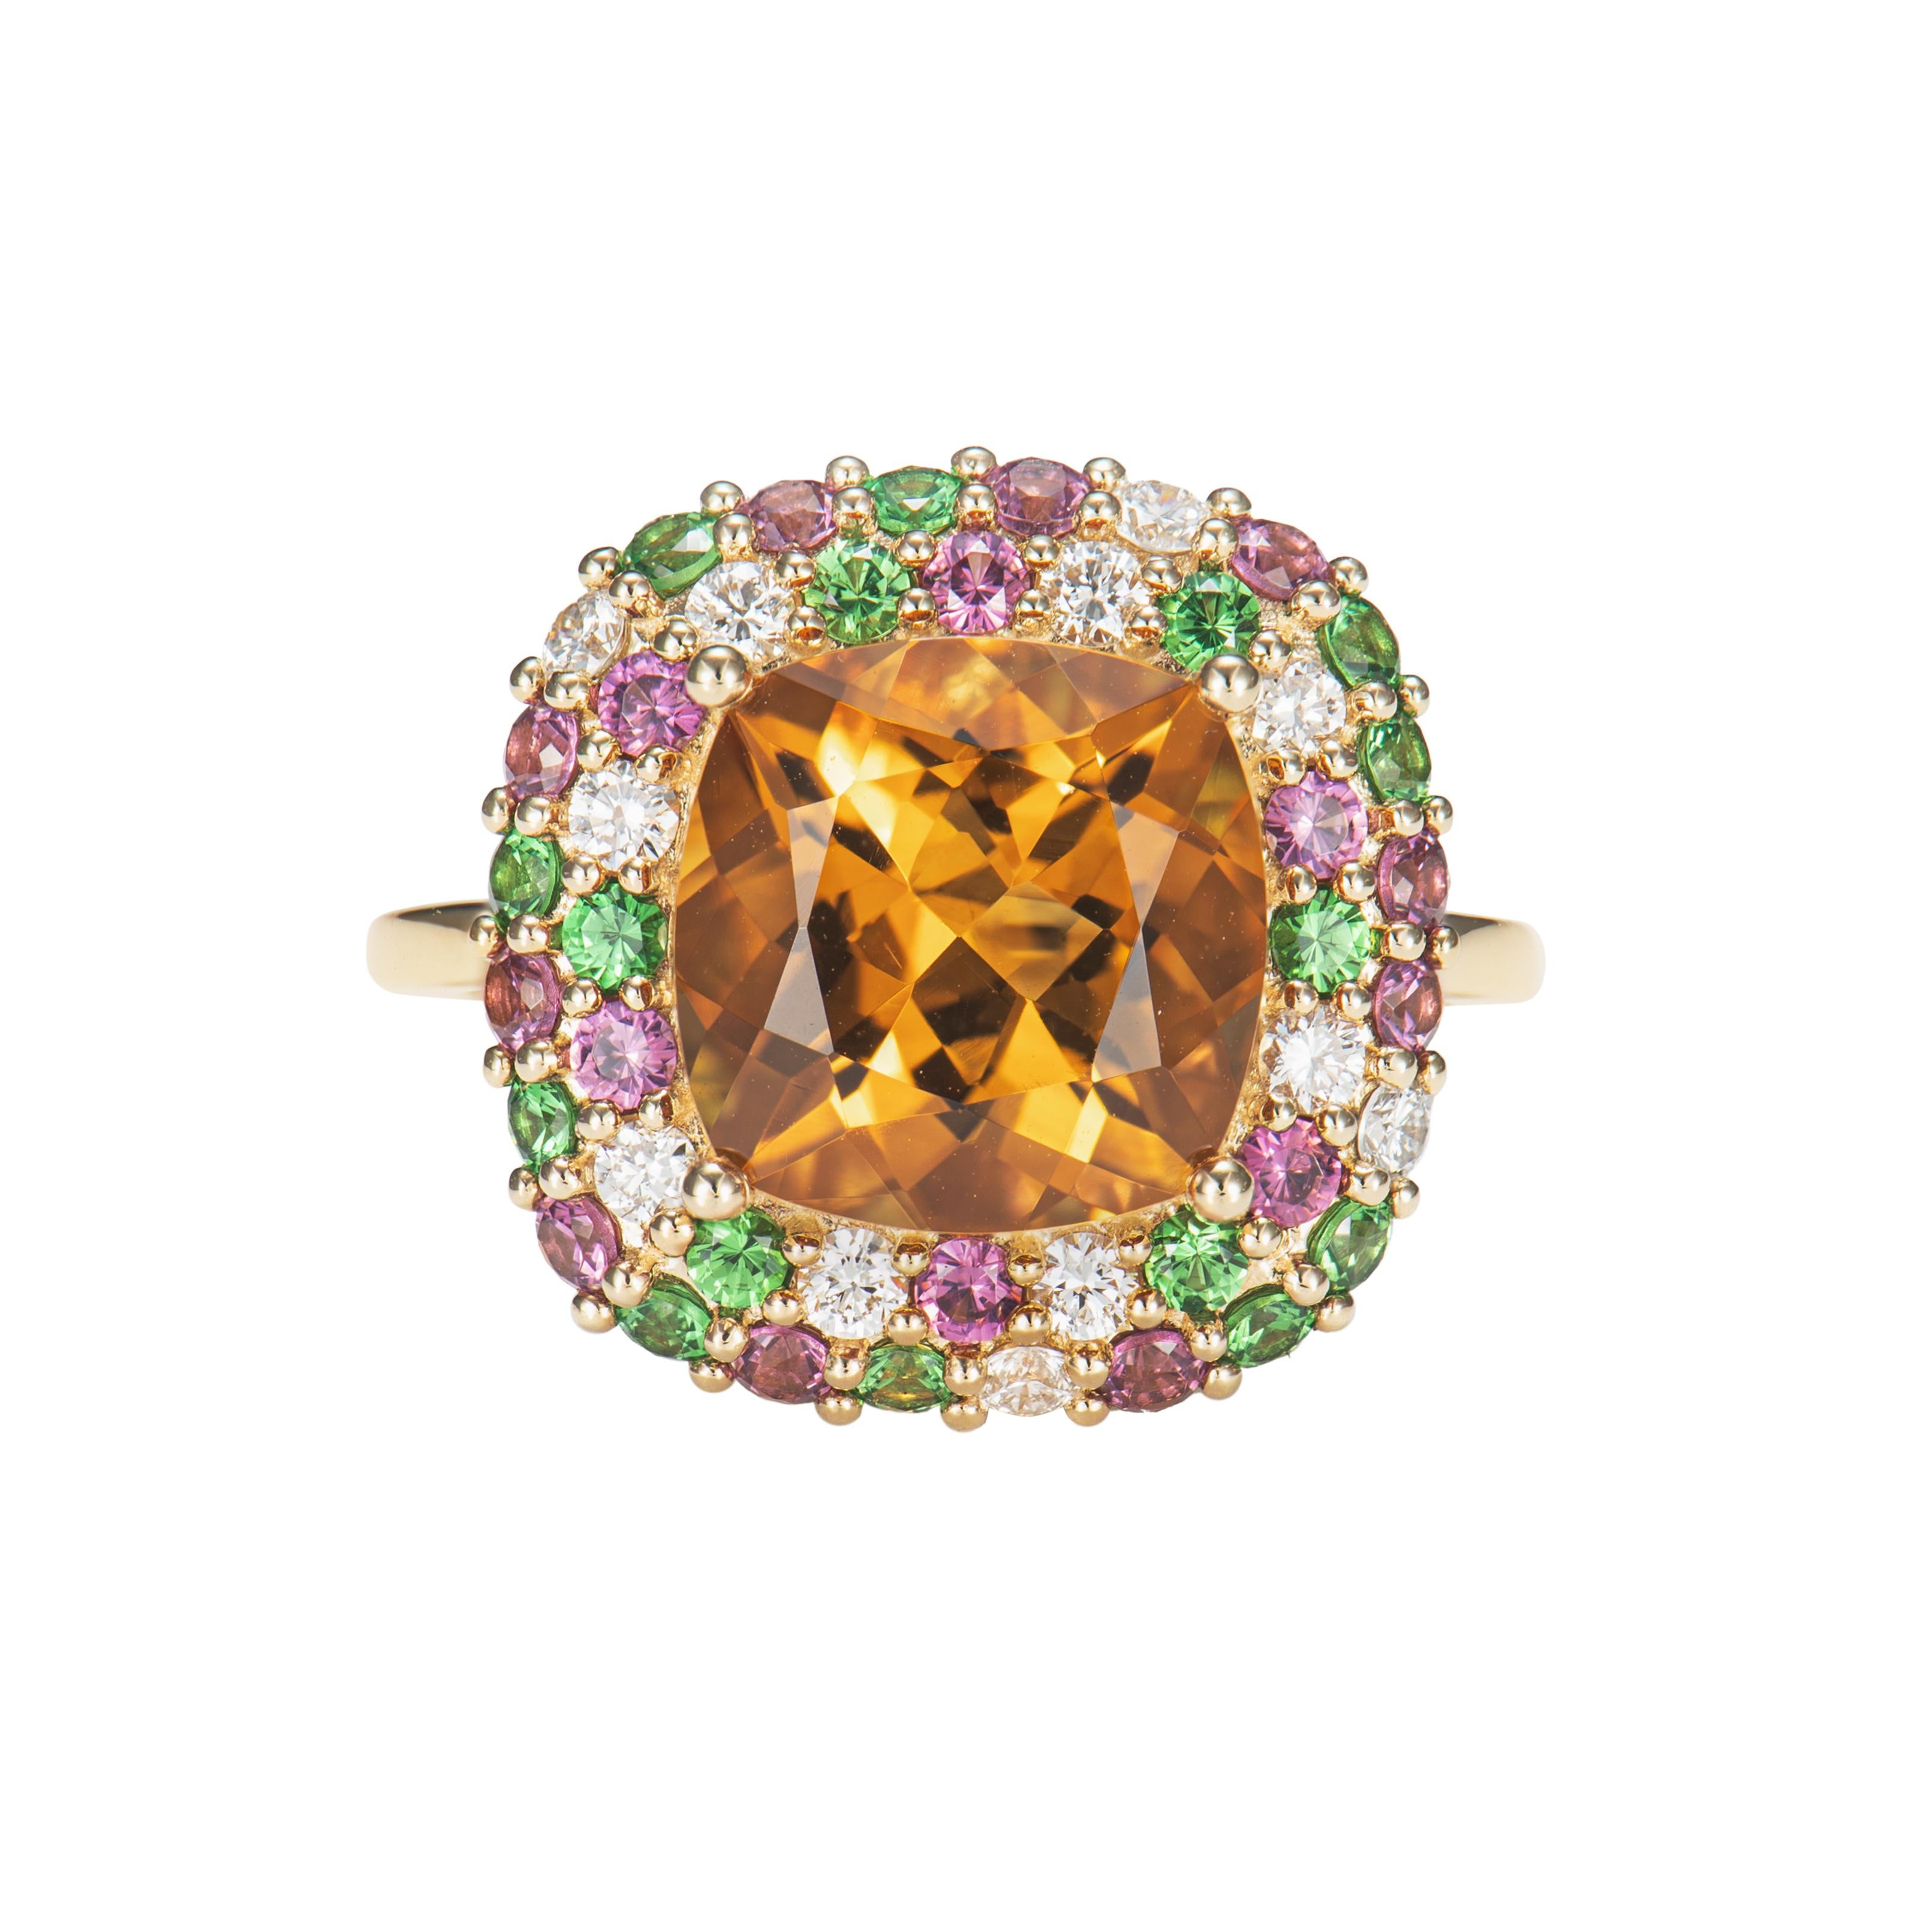 Contemporary 3.93 Carat Citrine Cocktail Ring in 14KRG with Tsavorite, Rhodolite and Diamond. For Sale